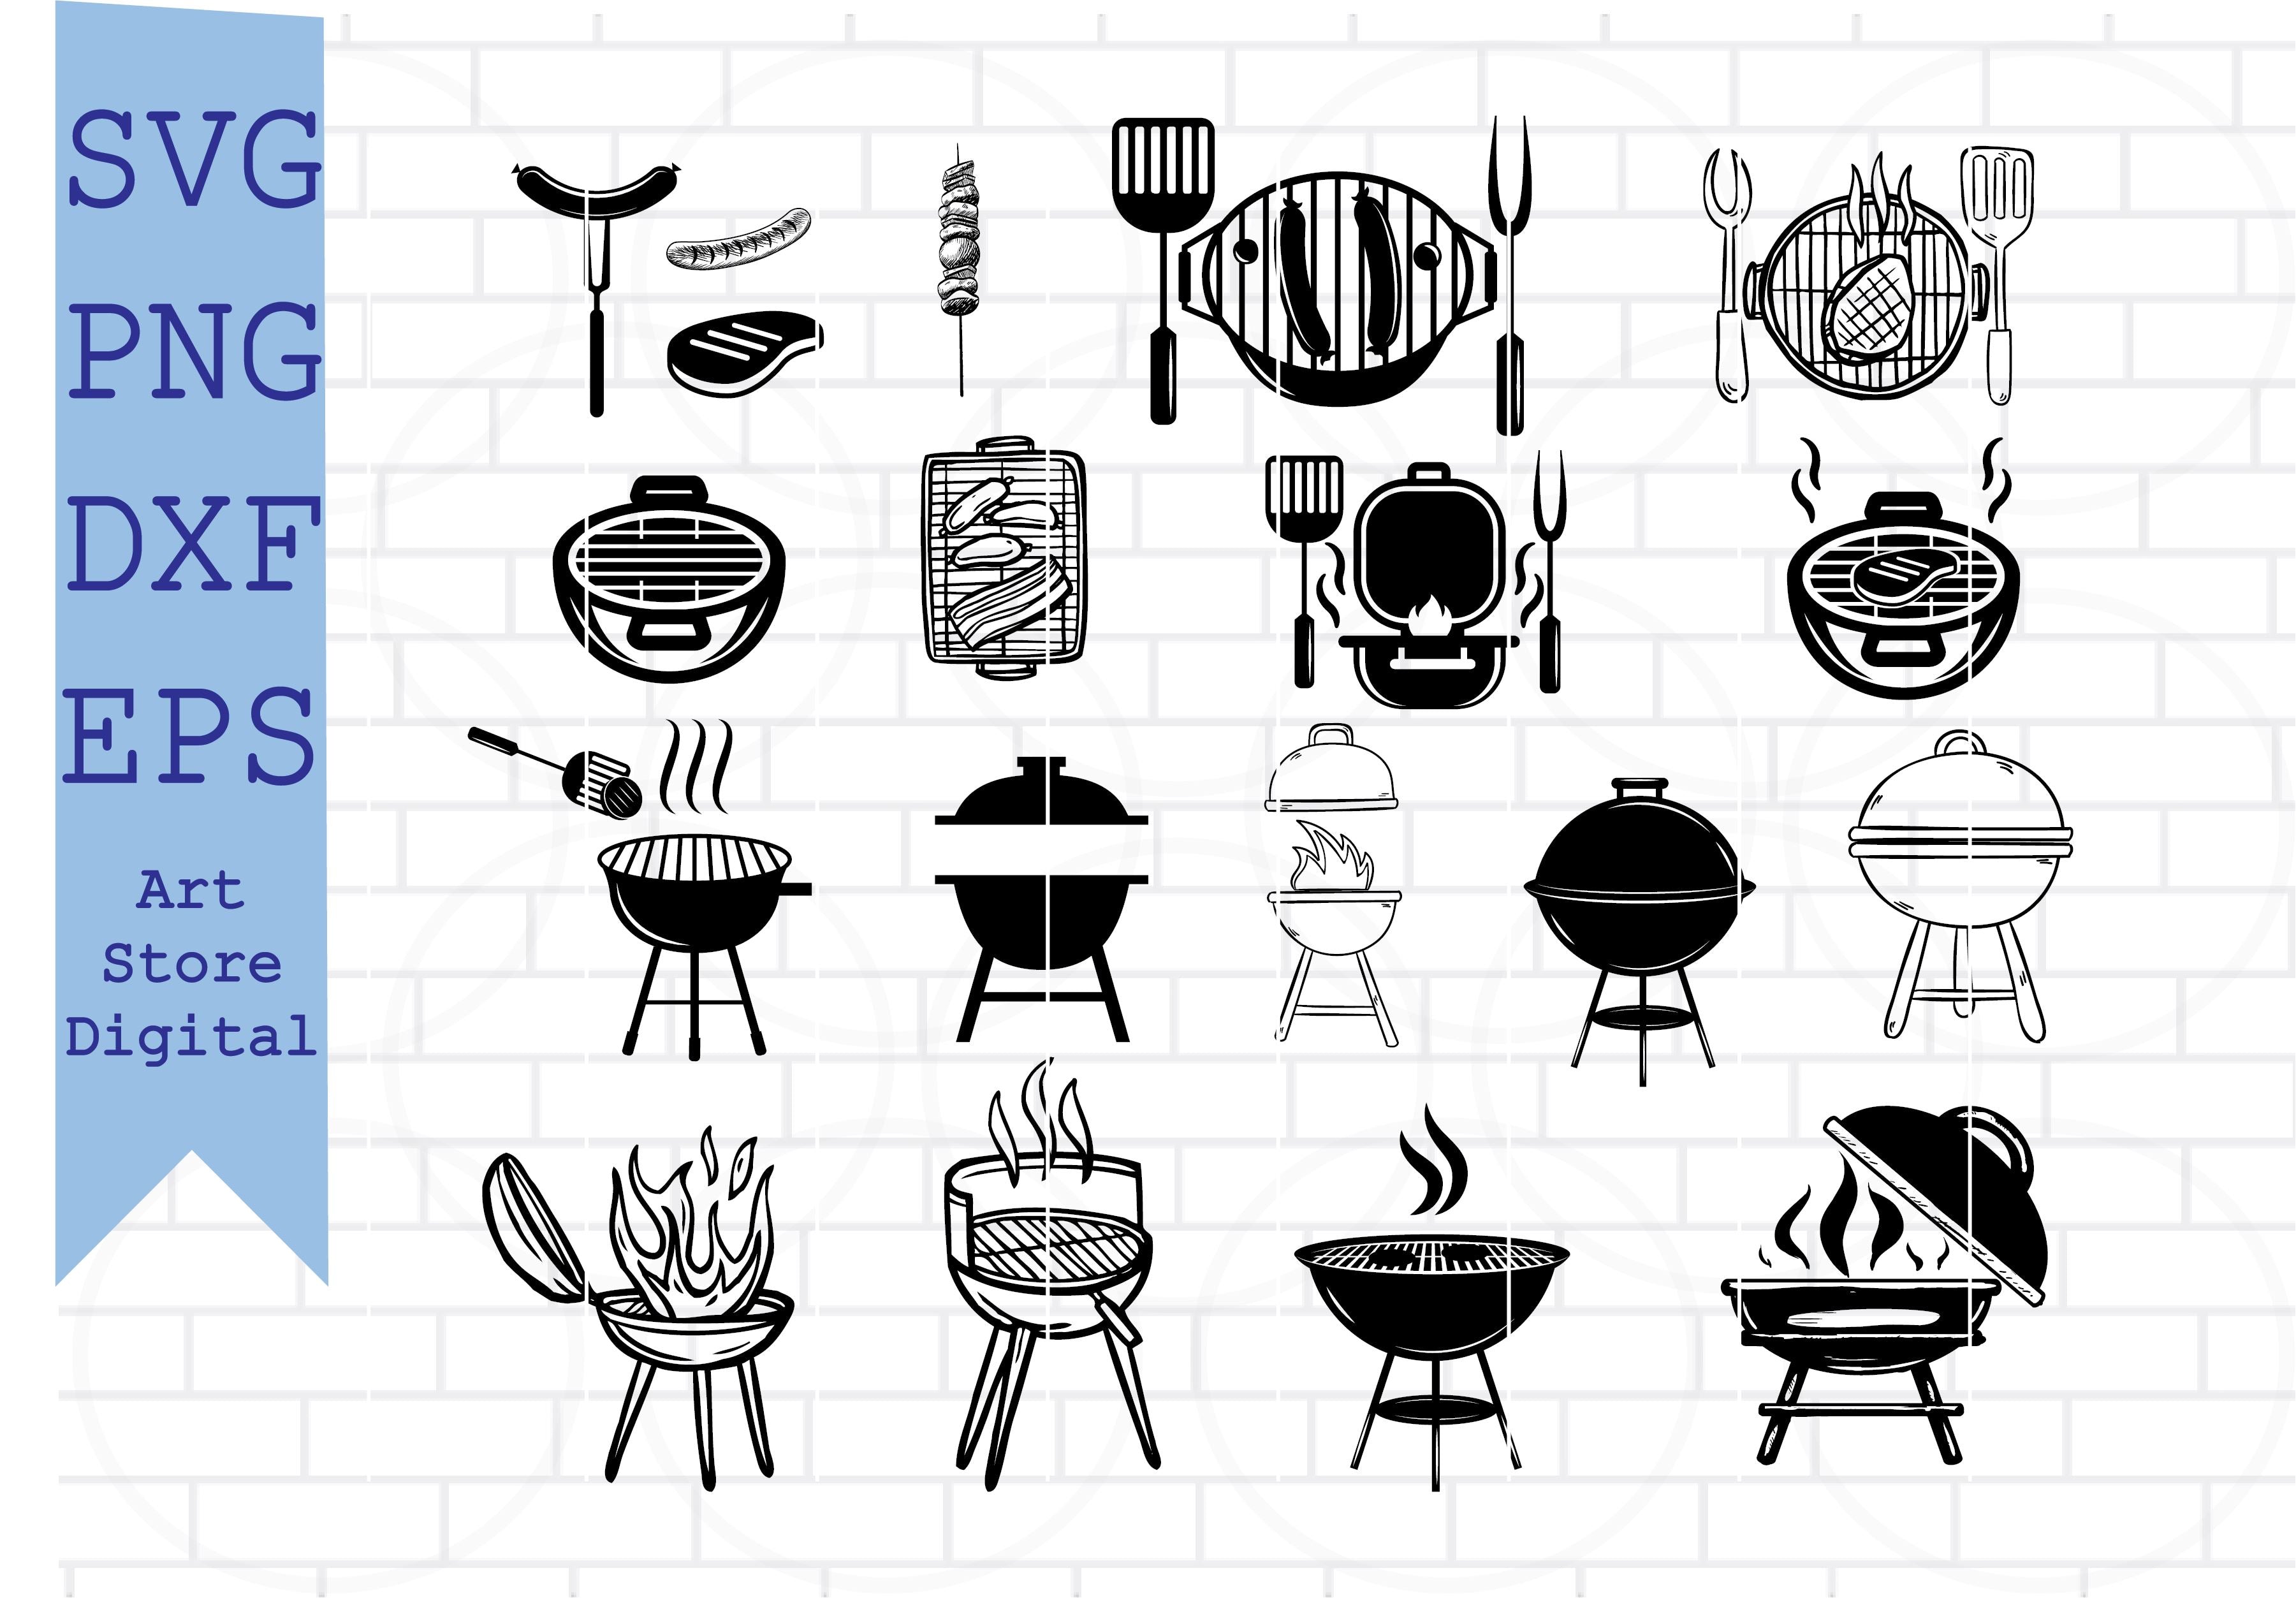 Barbecue Equipment - Pictogram Royalty Free SVG, Cliparts, Vectors